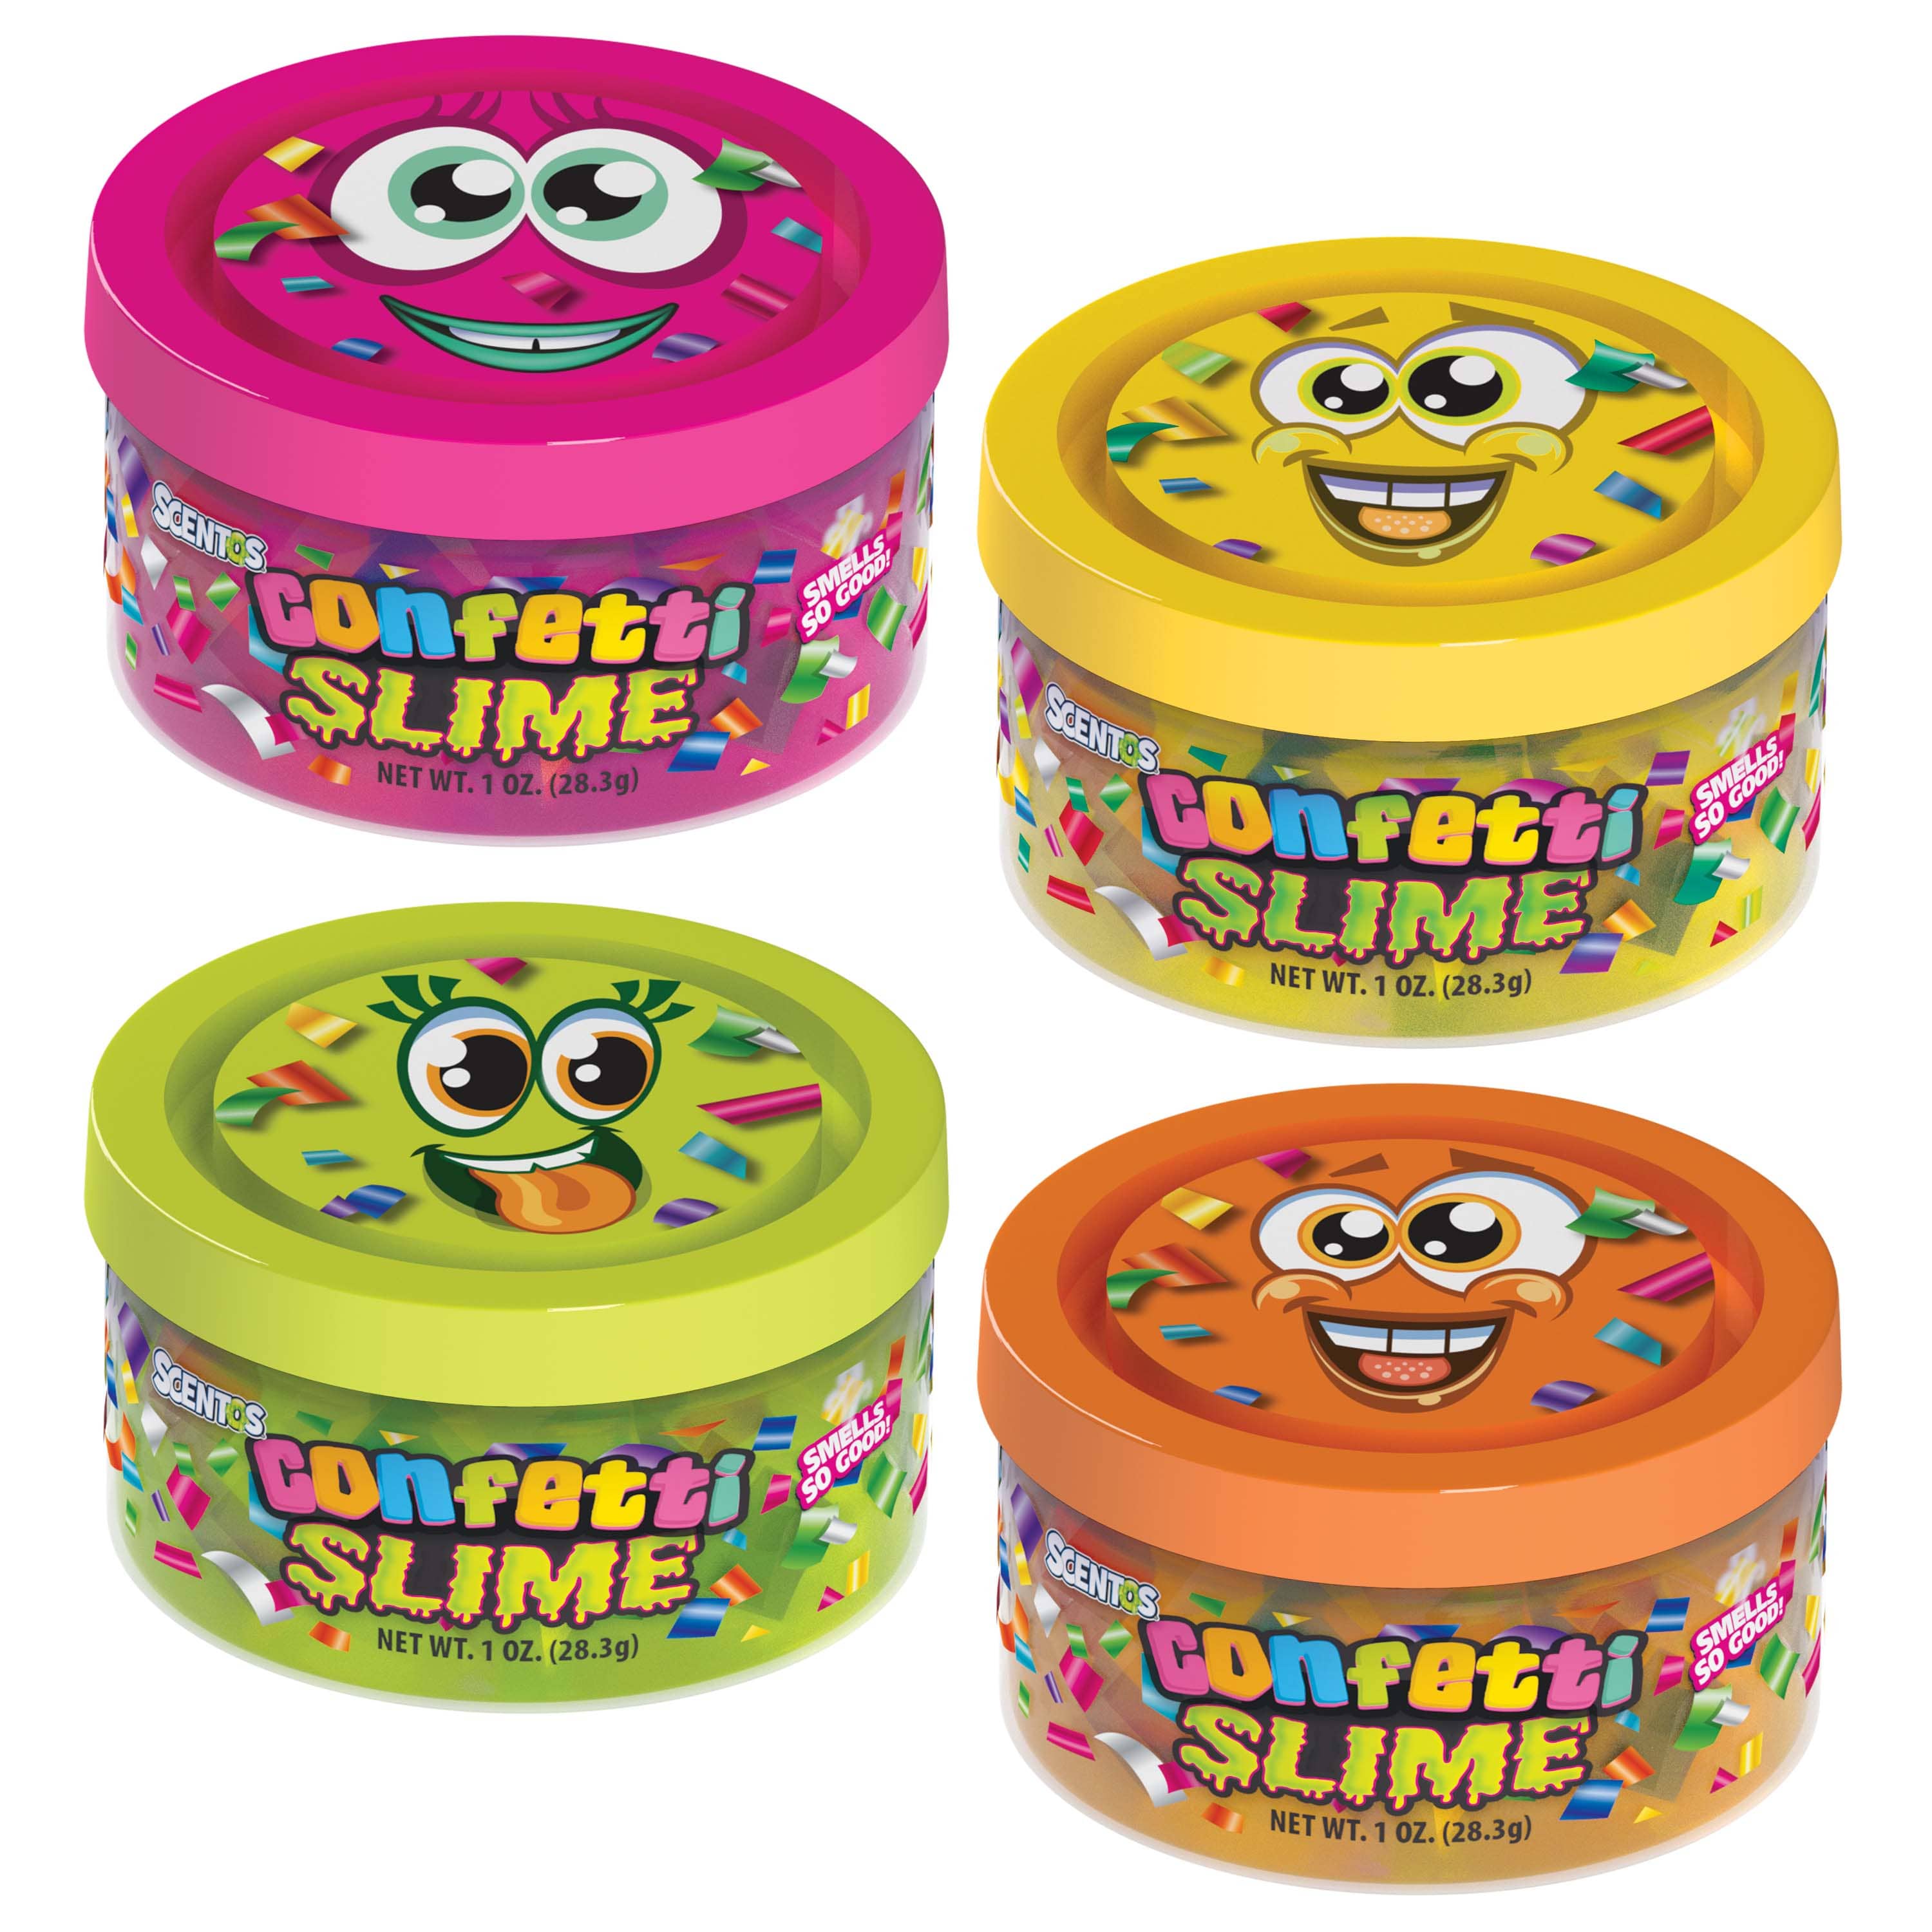 Scentos Scented Confetti Slime 4 Pack Set